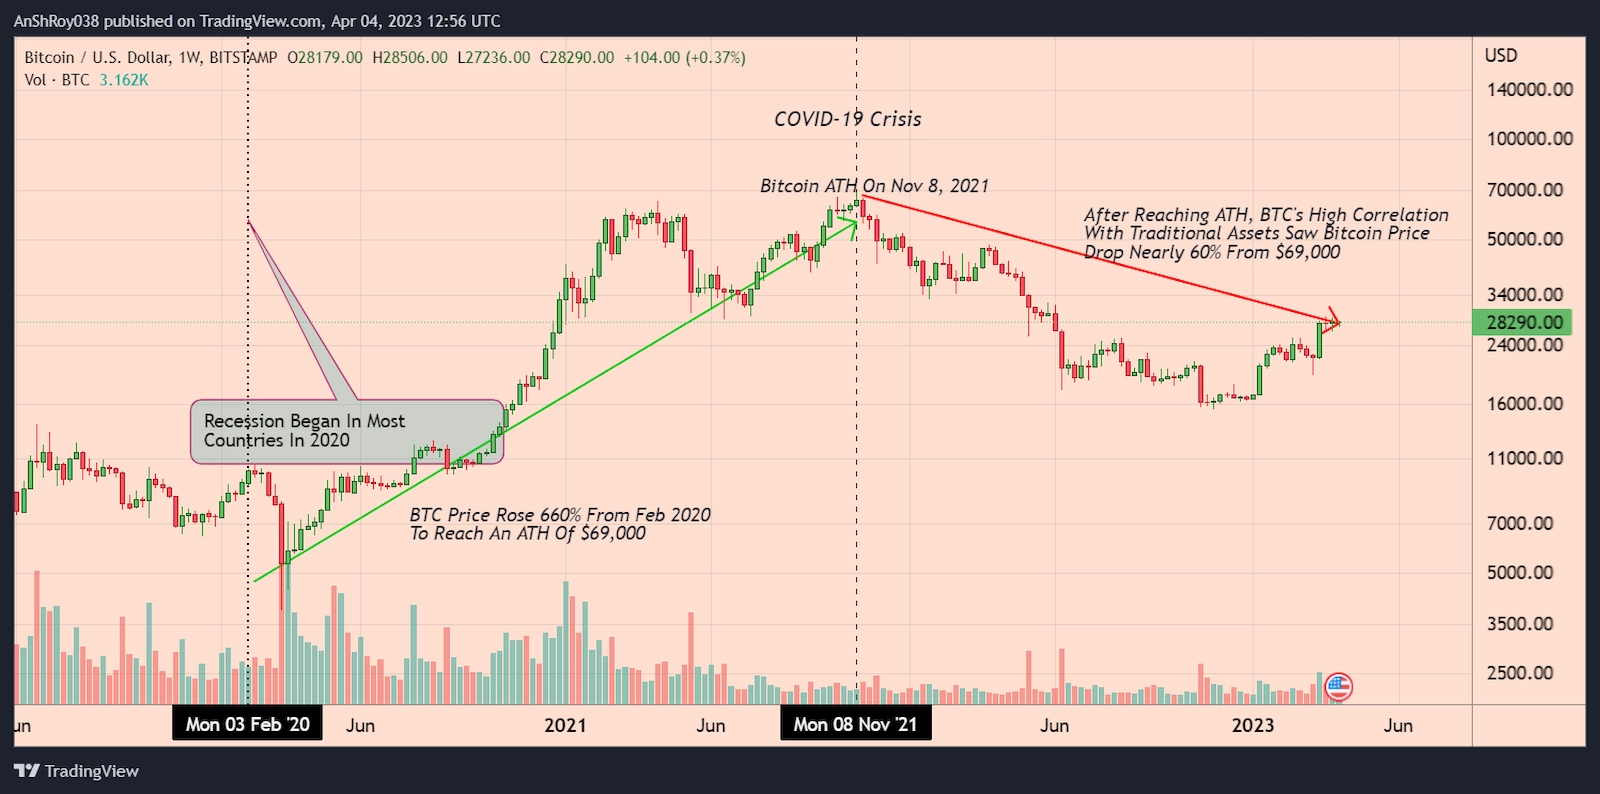 Bitcoin price action has correlated strongly with the traditional markets since 2021